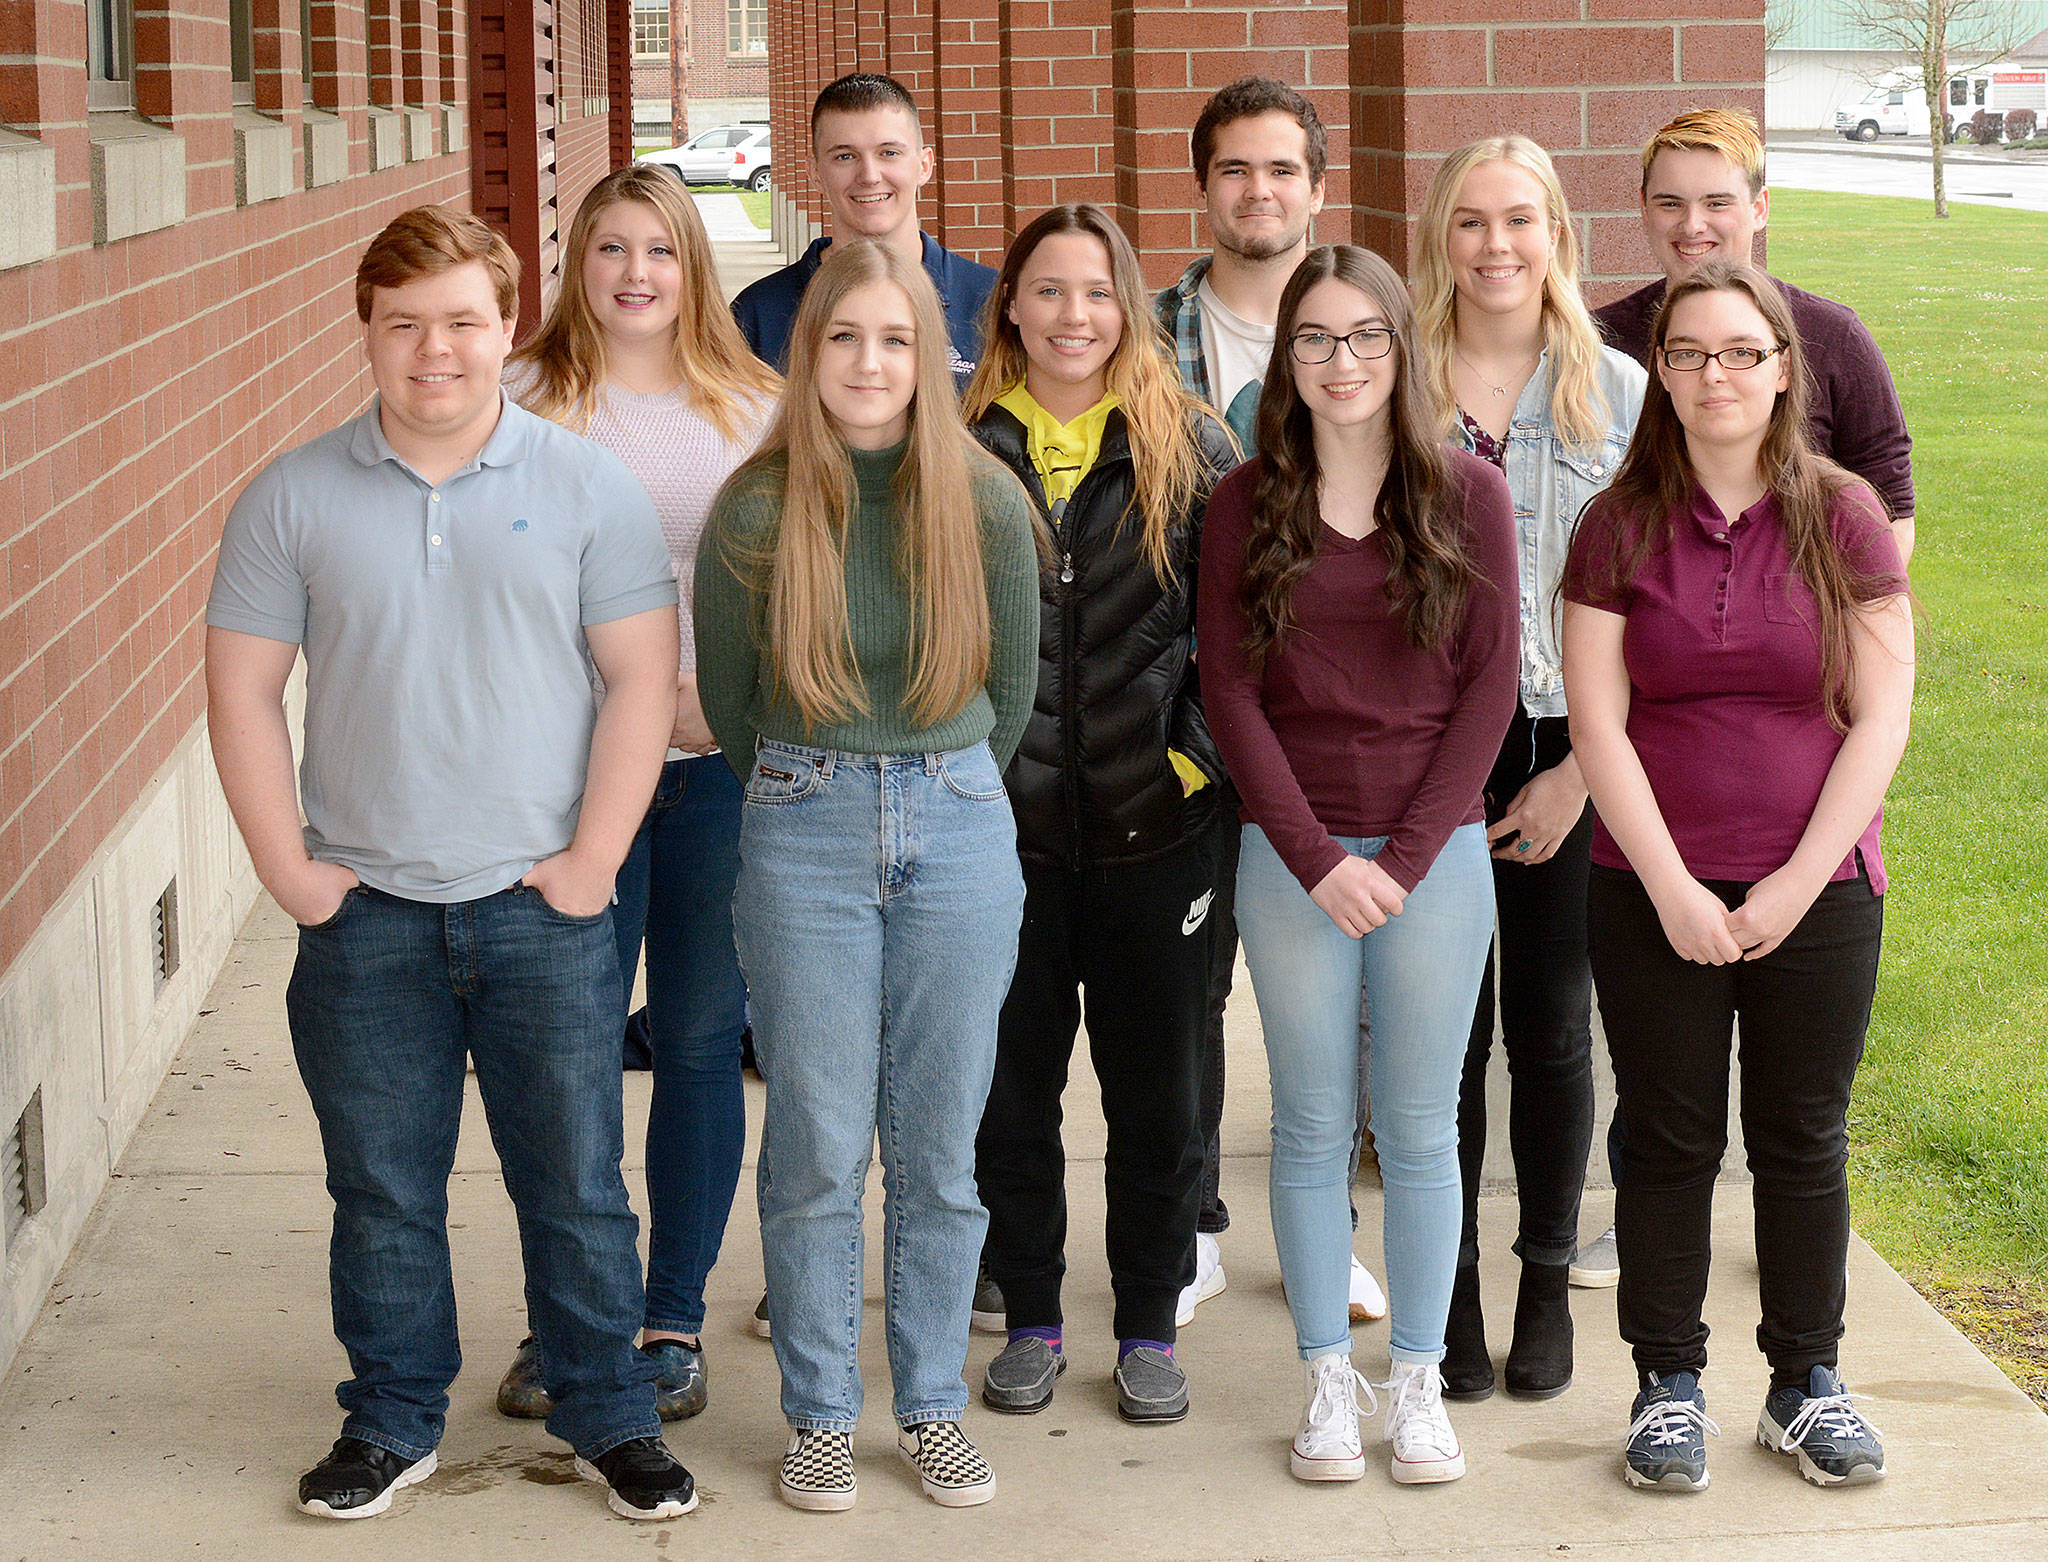 From left — front row: Ben Cherry, Madison Hover, Hannah Erwin and Brittany Howell. Middle row: Sierra Bunnell, Karli Heikkila and Mackayla Waltee, Back row: Brendan King, Patric Haerle and Aaron Dyer. Not pictured: Rachel Tageant.